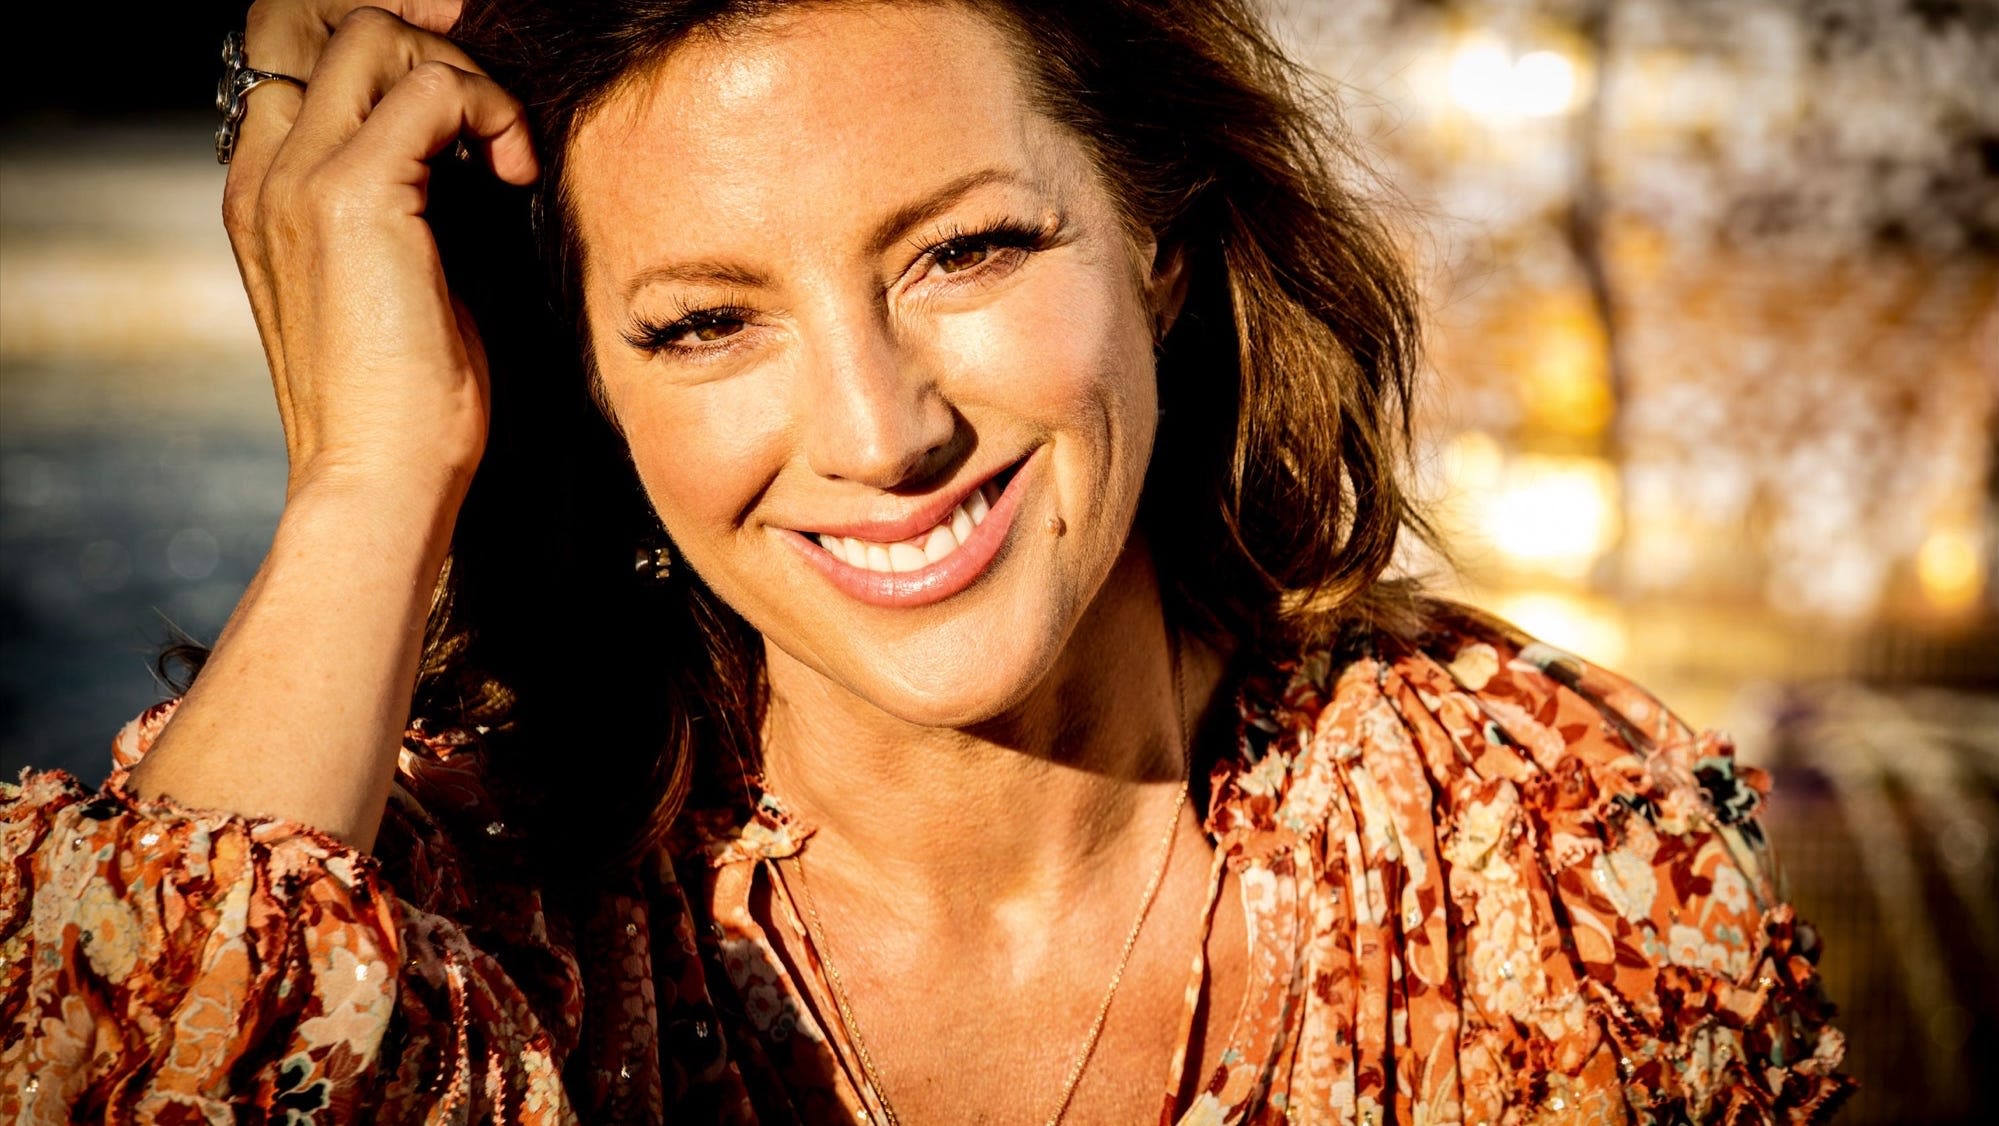 Sarah McLachlan struggled to find musical inspiration as a 'wealthy, middle-aged white woman'